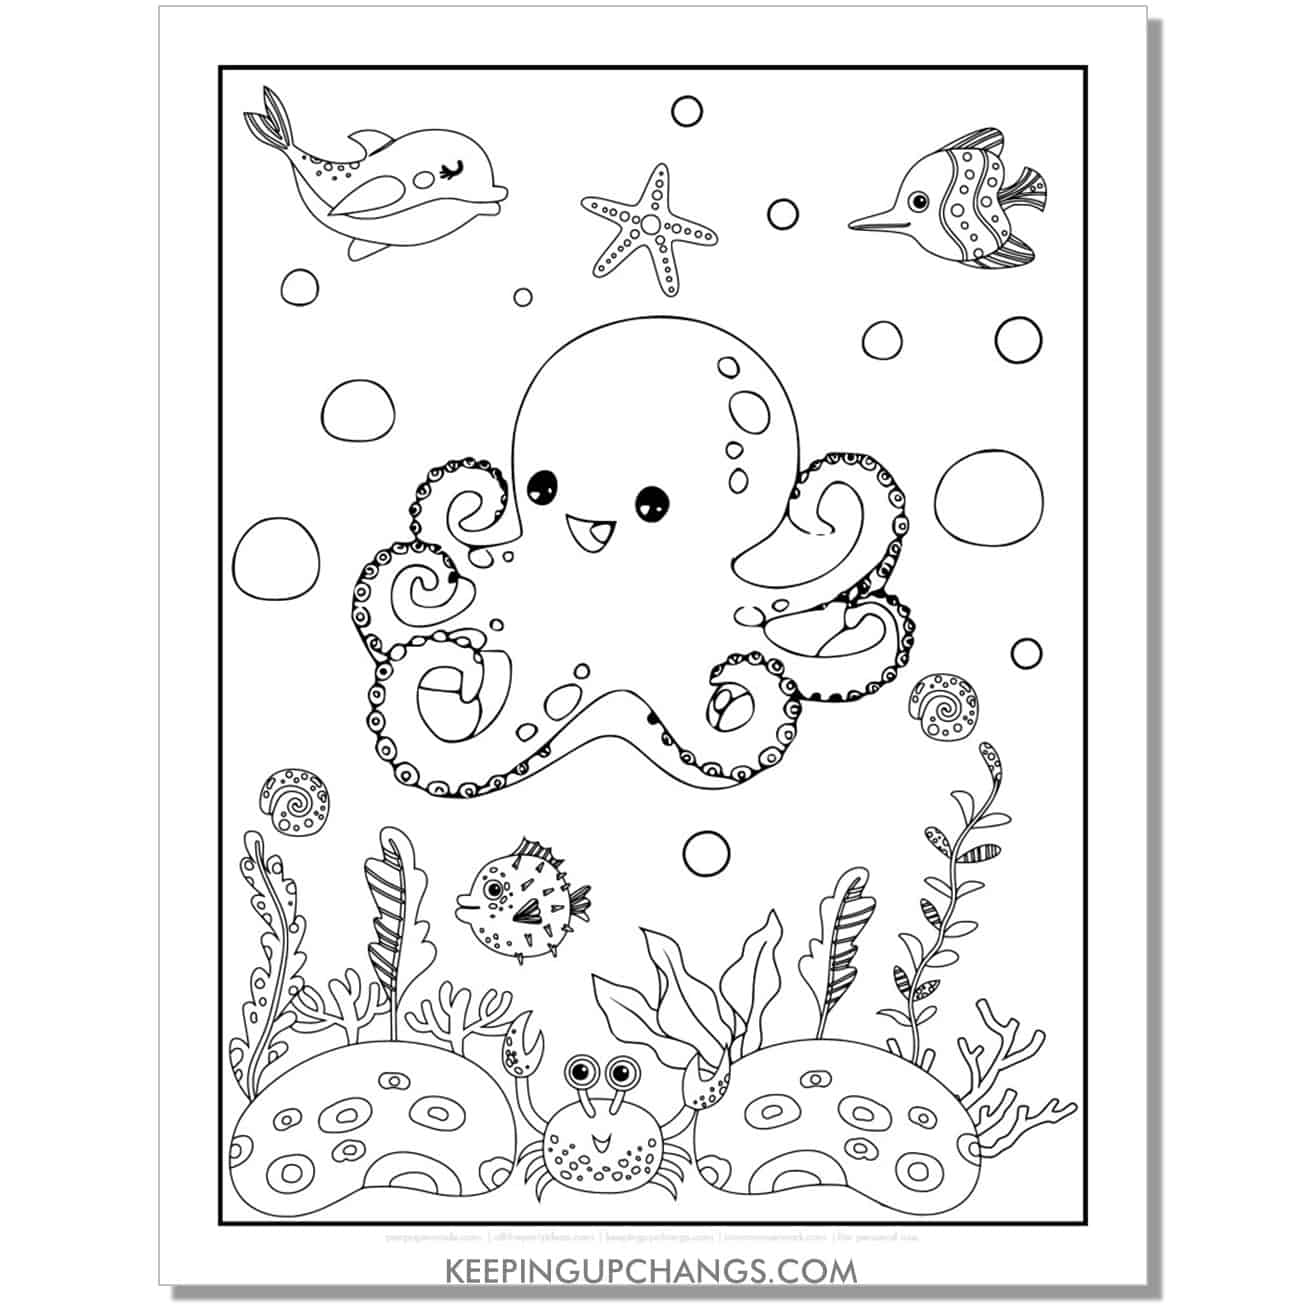 free adorable octopus coloring page, sheet with dolphin, crab, fish, sea star.